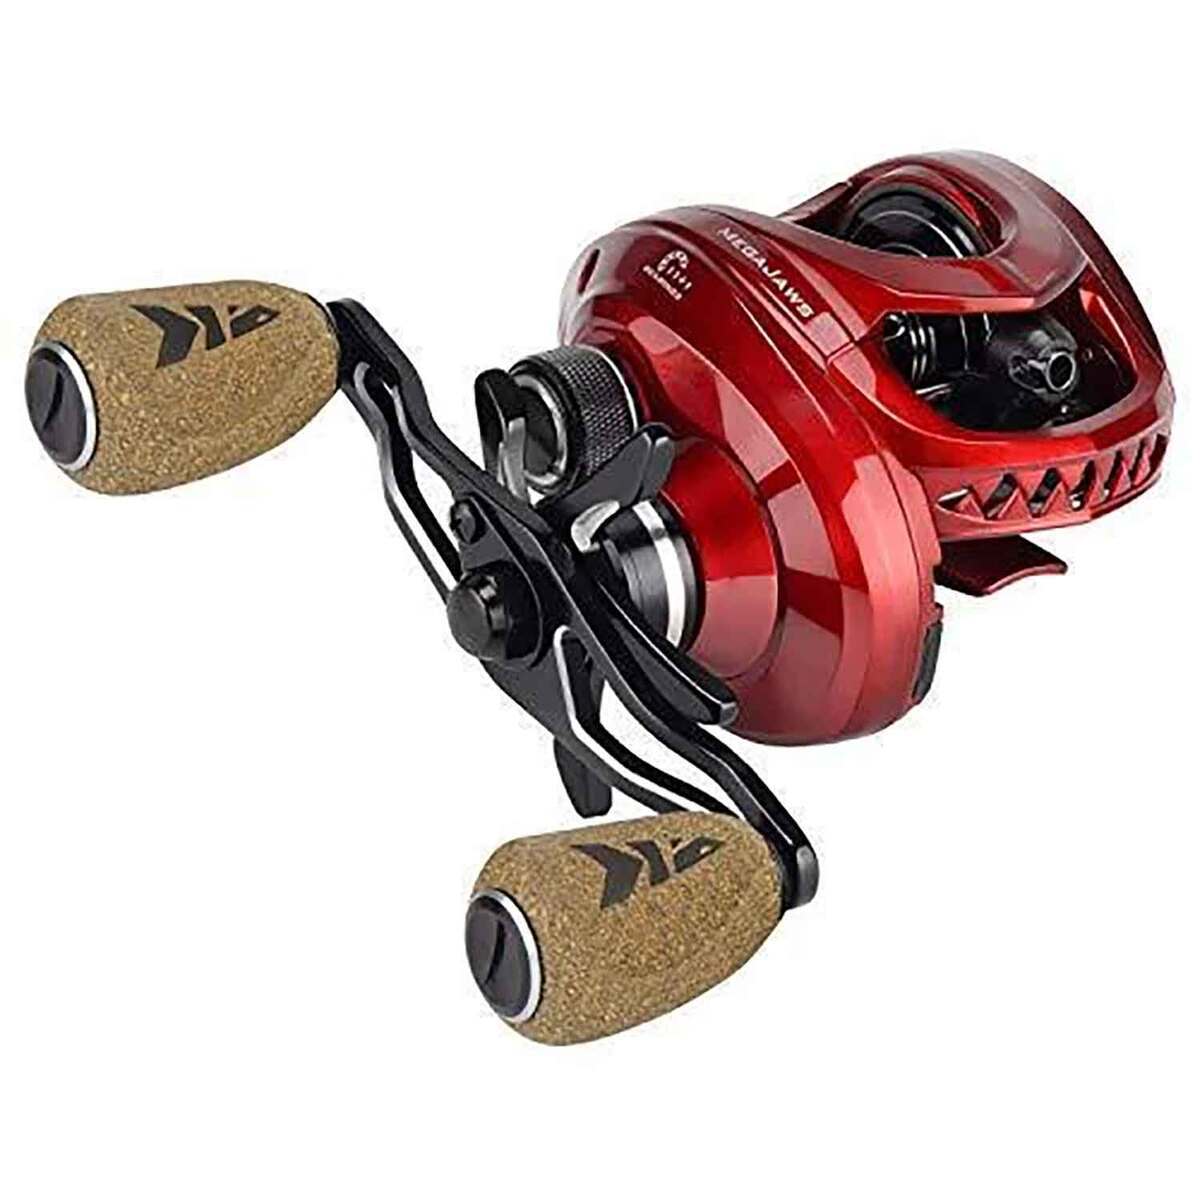 Camping World Lew's Mach Smash SLP Baitcast Reel in Red